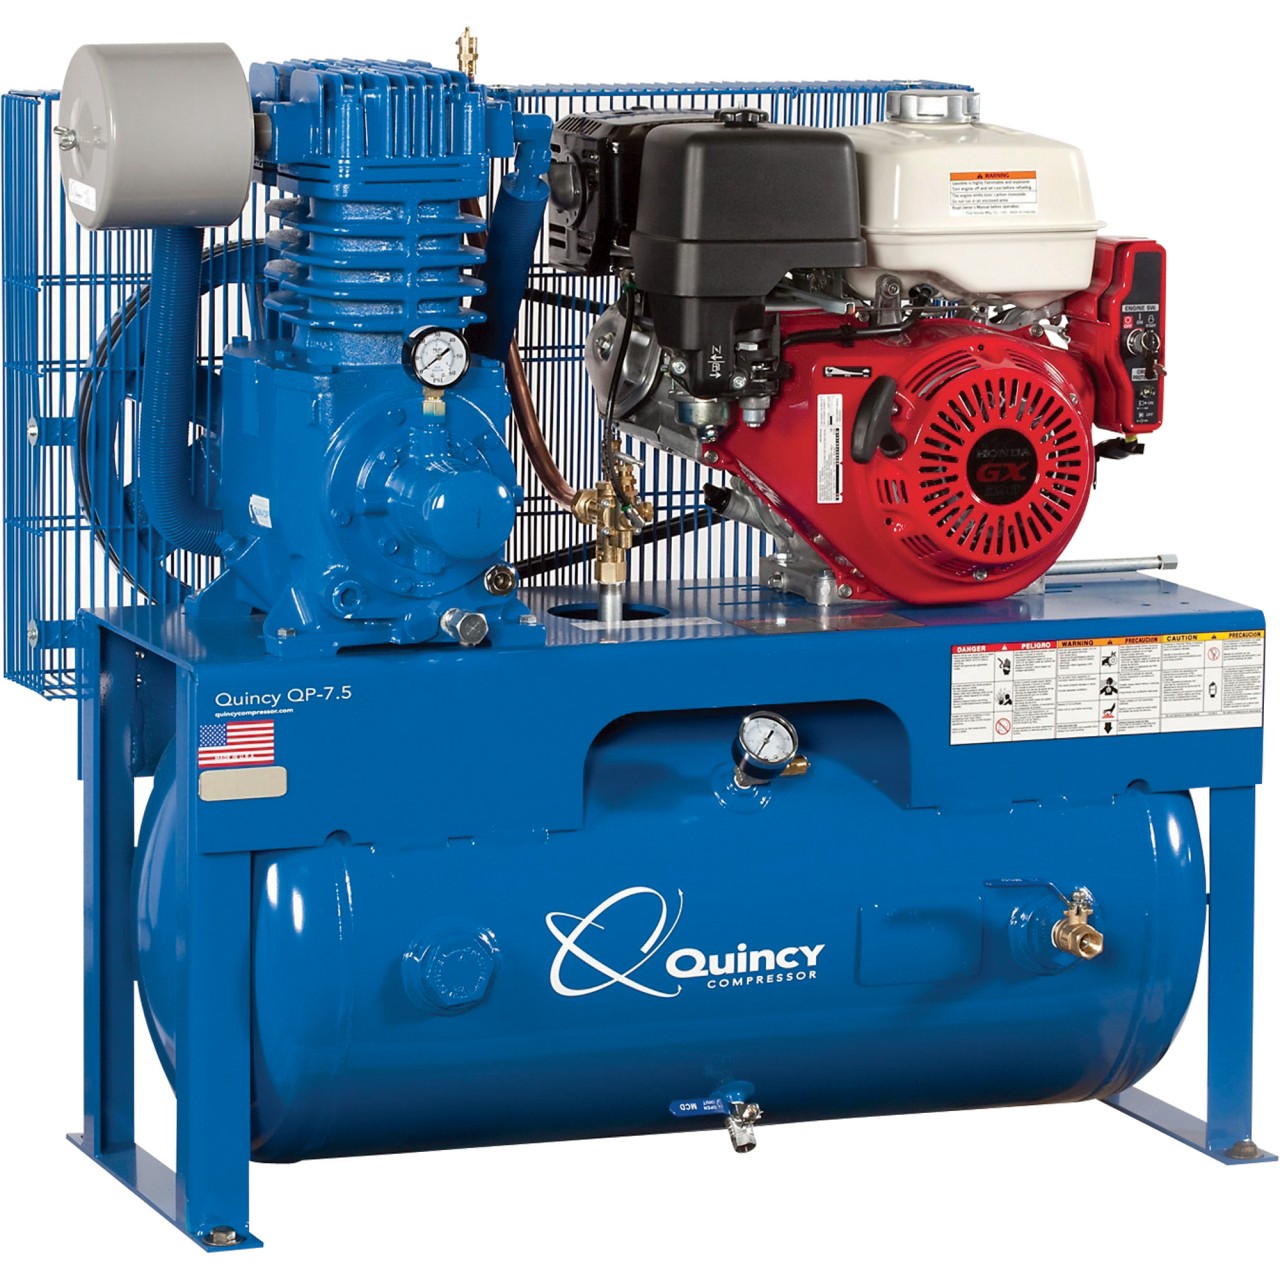 Quincy Qp 75 Pressure Lubricated Reciprocating Air Compressor — 13 Hp